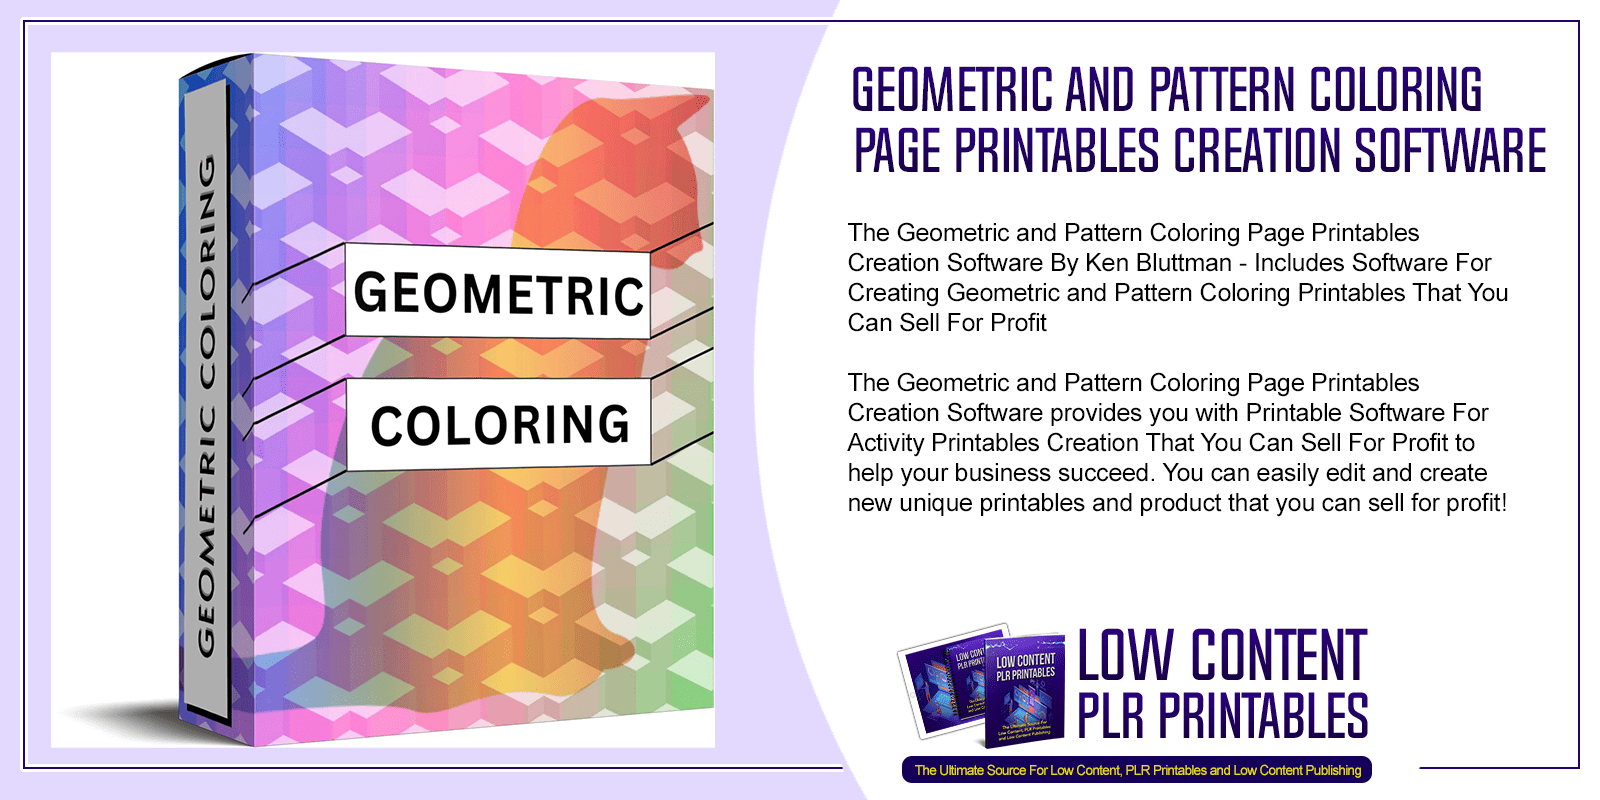 Geometric and Pattern Coloring Page Printables Creation Software